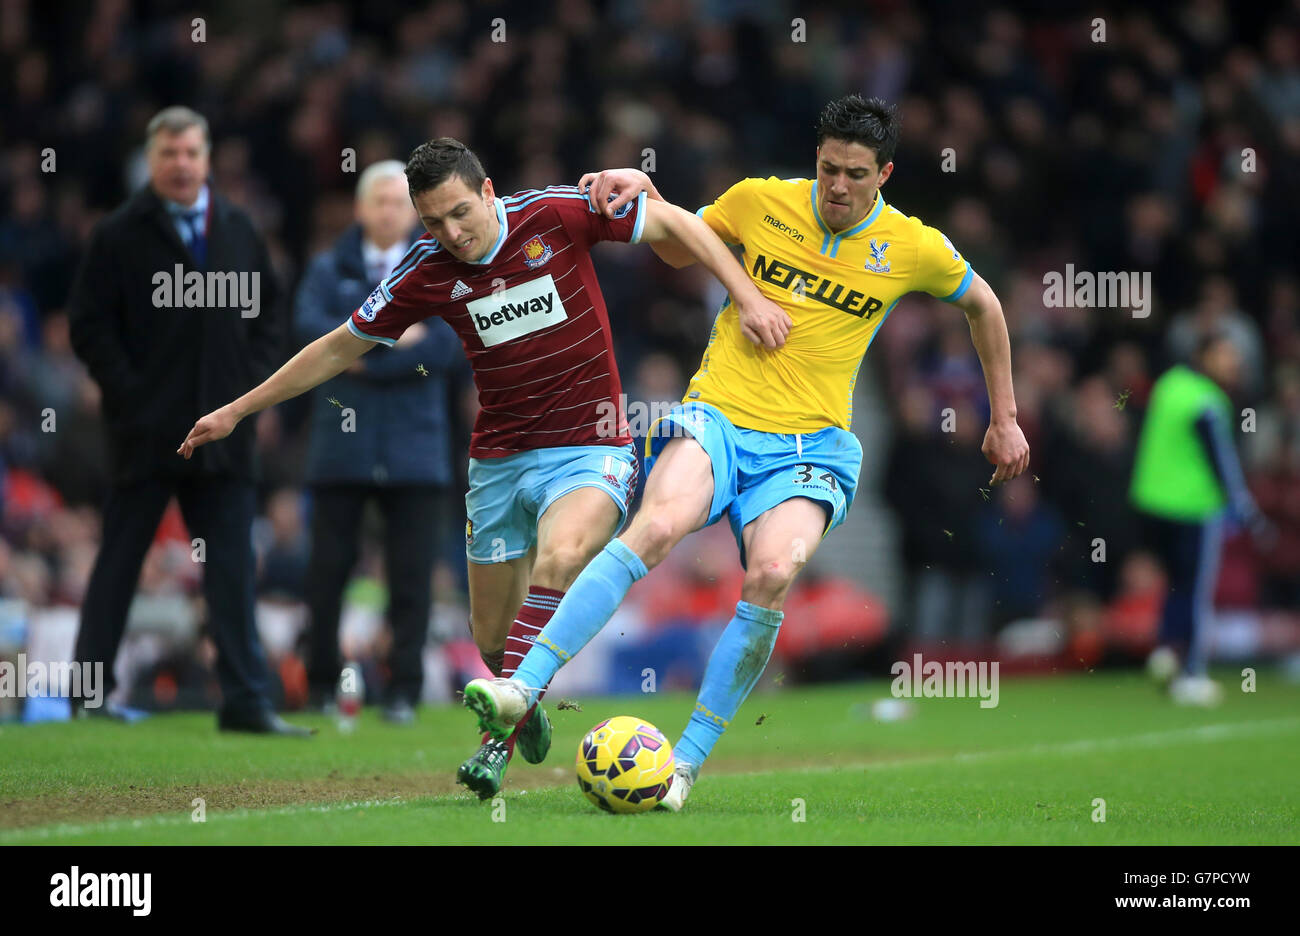 Crystal Palace's Martin Kelly (right) and West Ham United's Stewart Downing battle for the ball during the Barclays Premier League match at Upton Park, London. PRESS ASSOCIATION Photo. Picture date: Saturday February 28, 2015. See PA story SOCCER West Ham. Photo credit should read: Nick Potts/PA Wire. Stock Photo